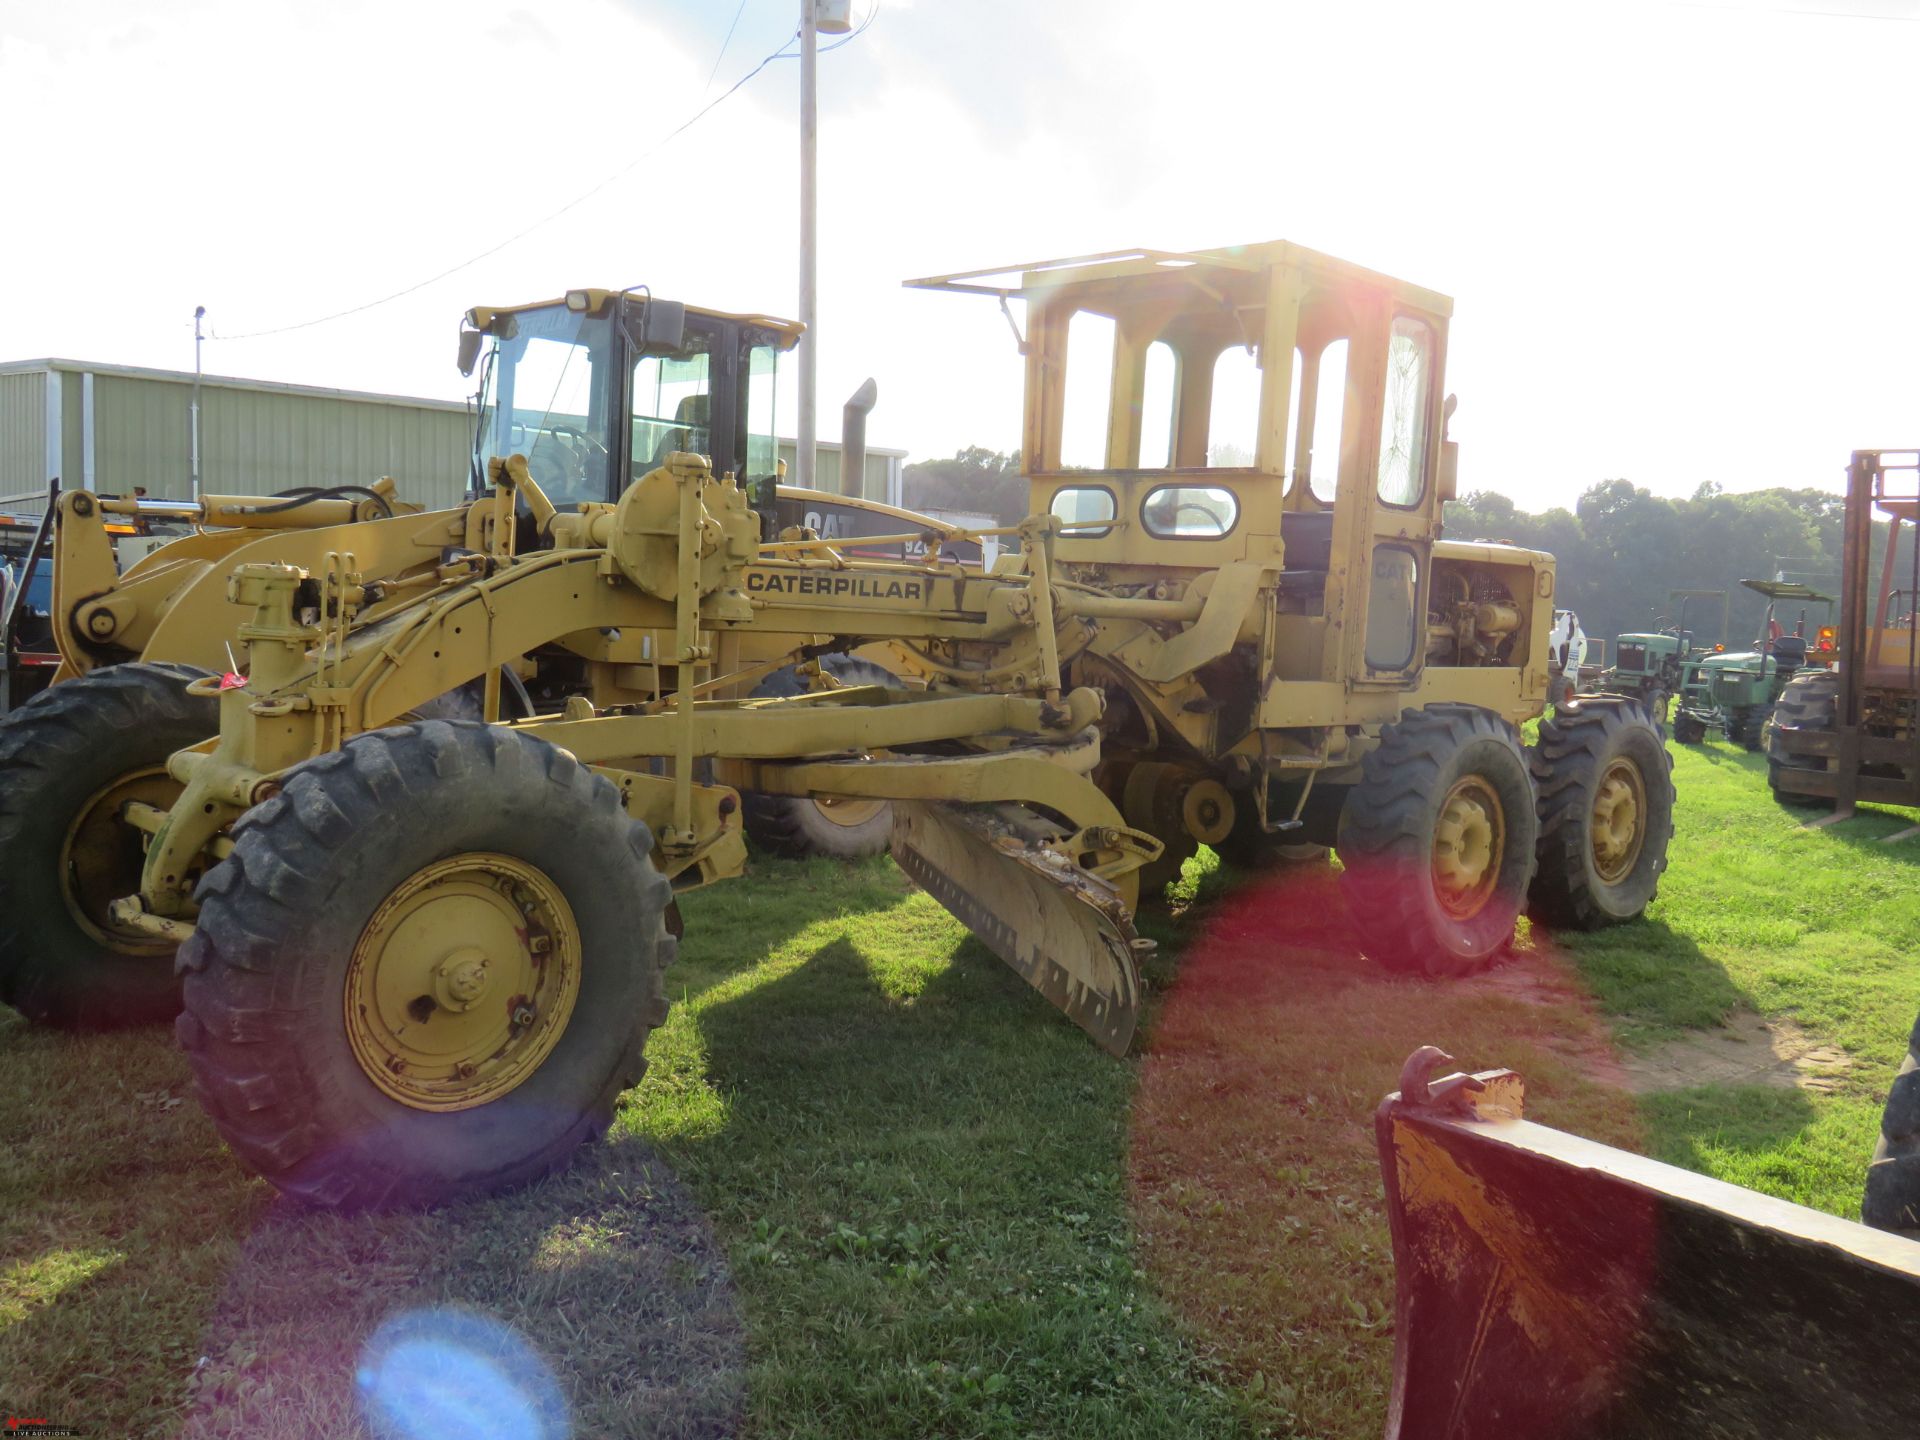 CAT 12 GRADER, 12' BLADE, CAB, SOME BROKEN WINDOWS, NO FRONT WINDSHIELD, HOURS NOT AVAILABLE, S/N